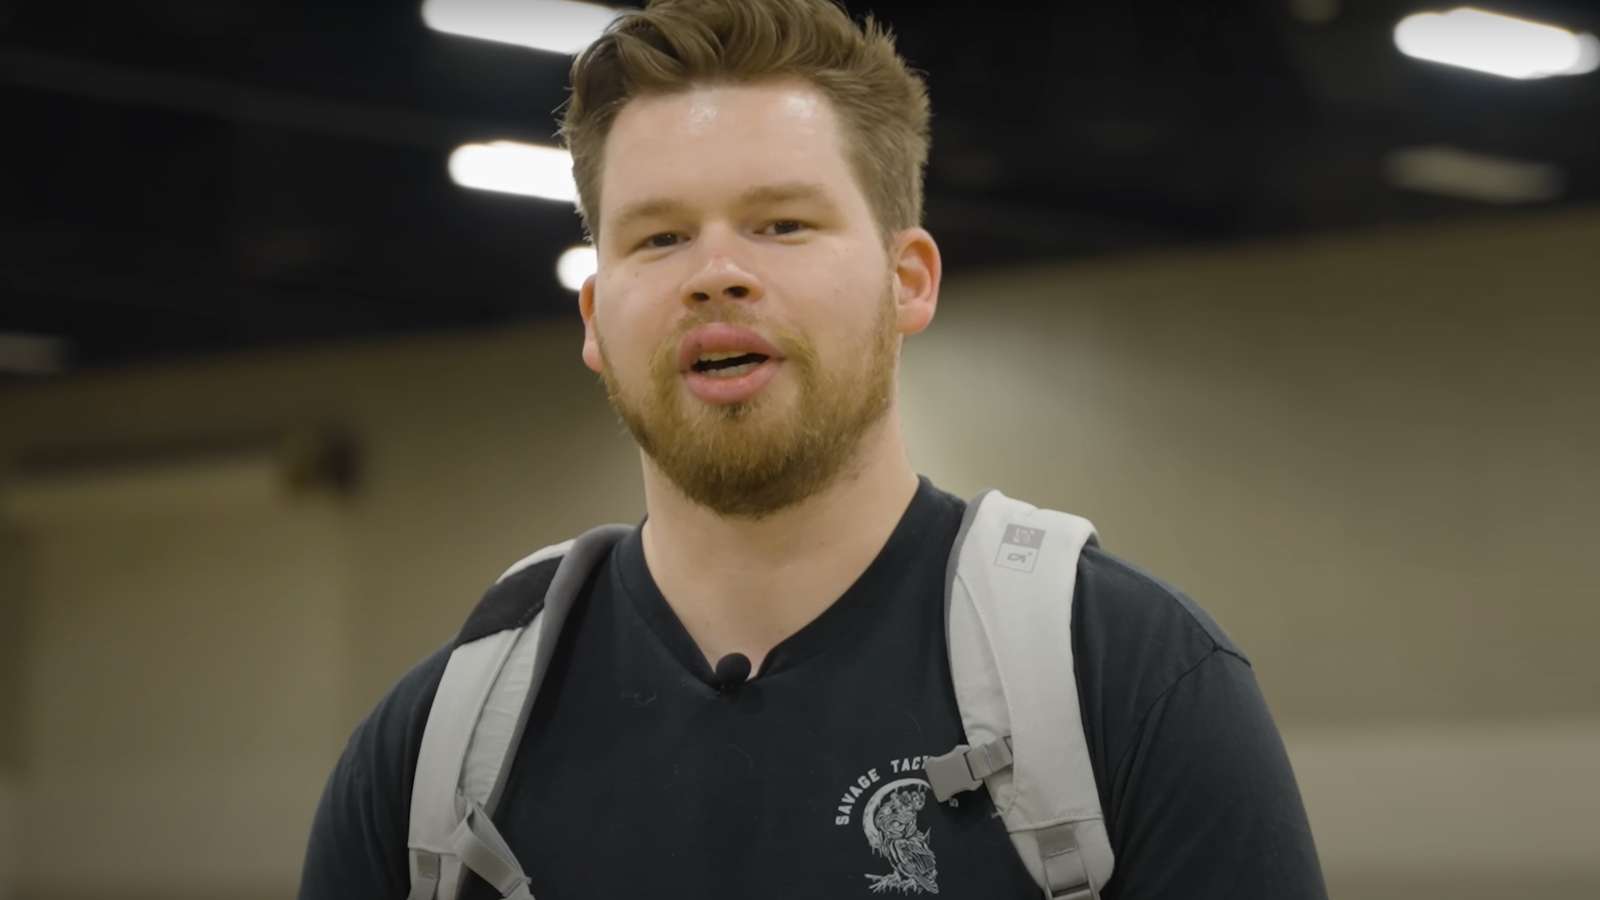 Ian 'Crimsix' Porter has retired from professional call of duty but he's still a pro at the end of the day.